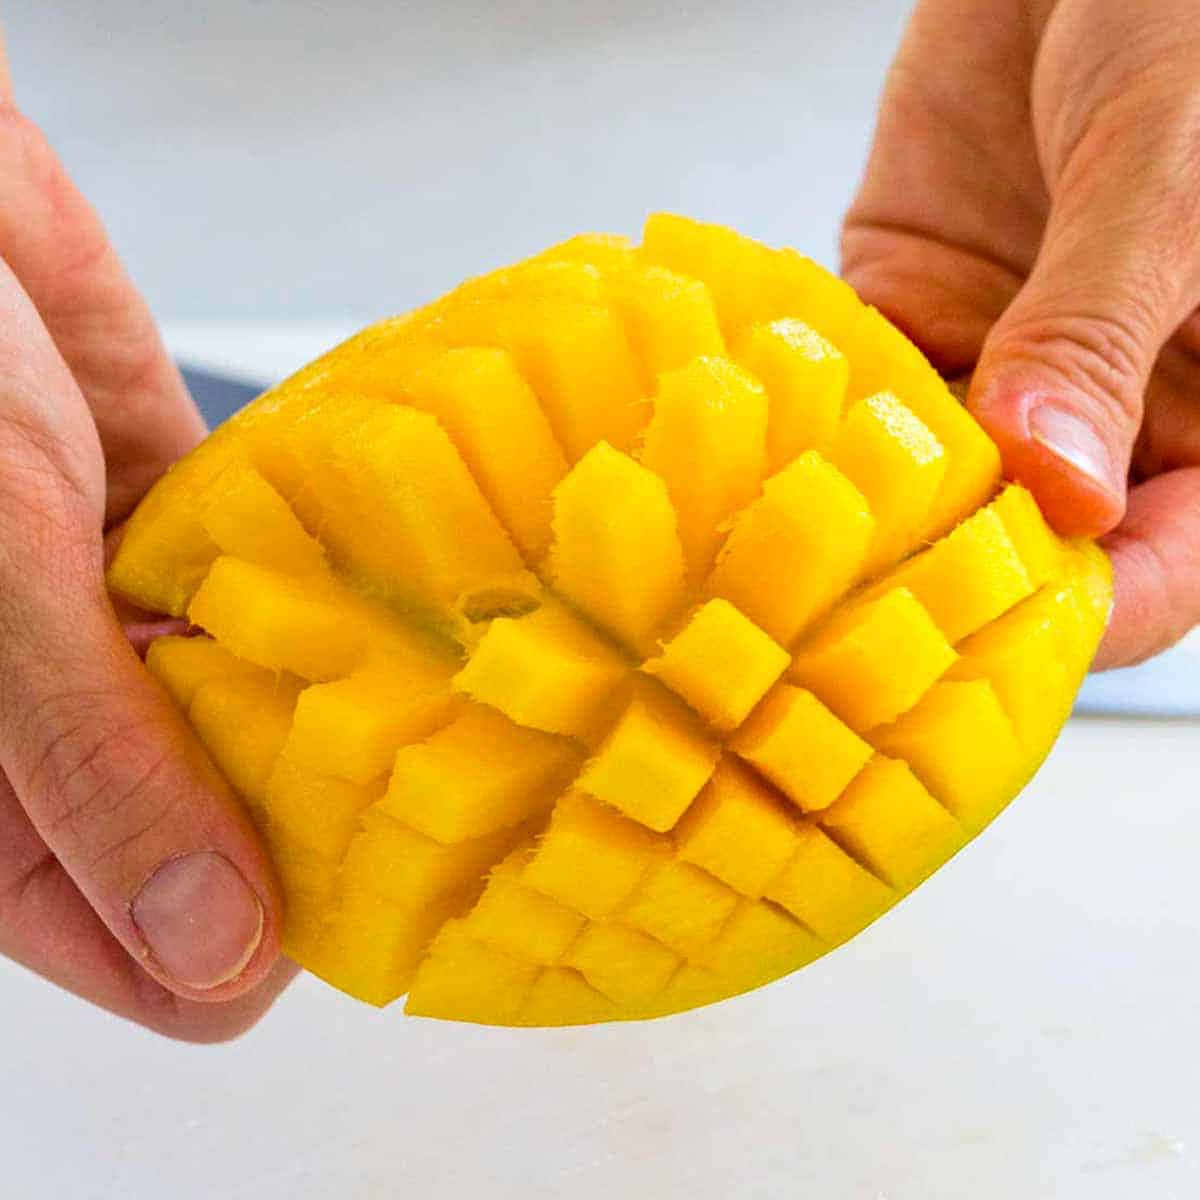 A ripe and juicy mango, ready to be eaten!